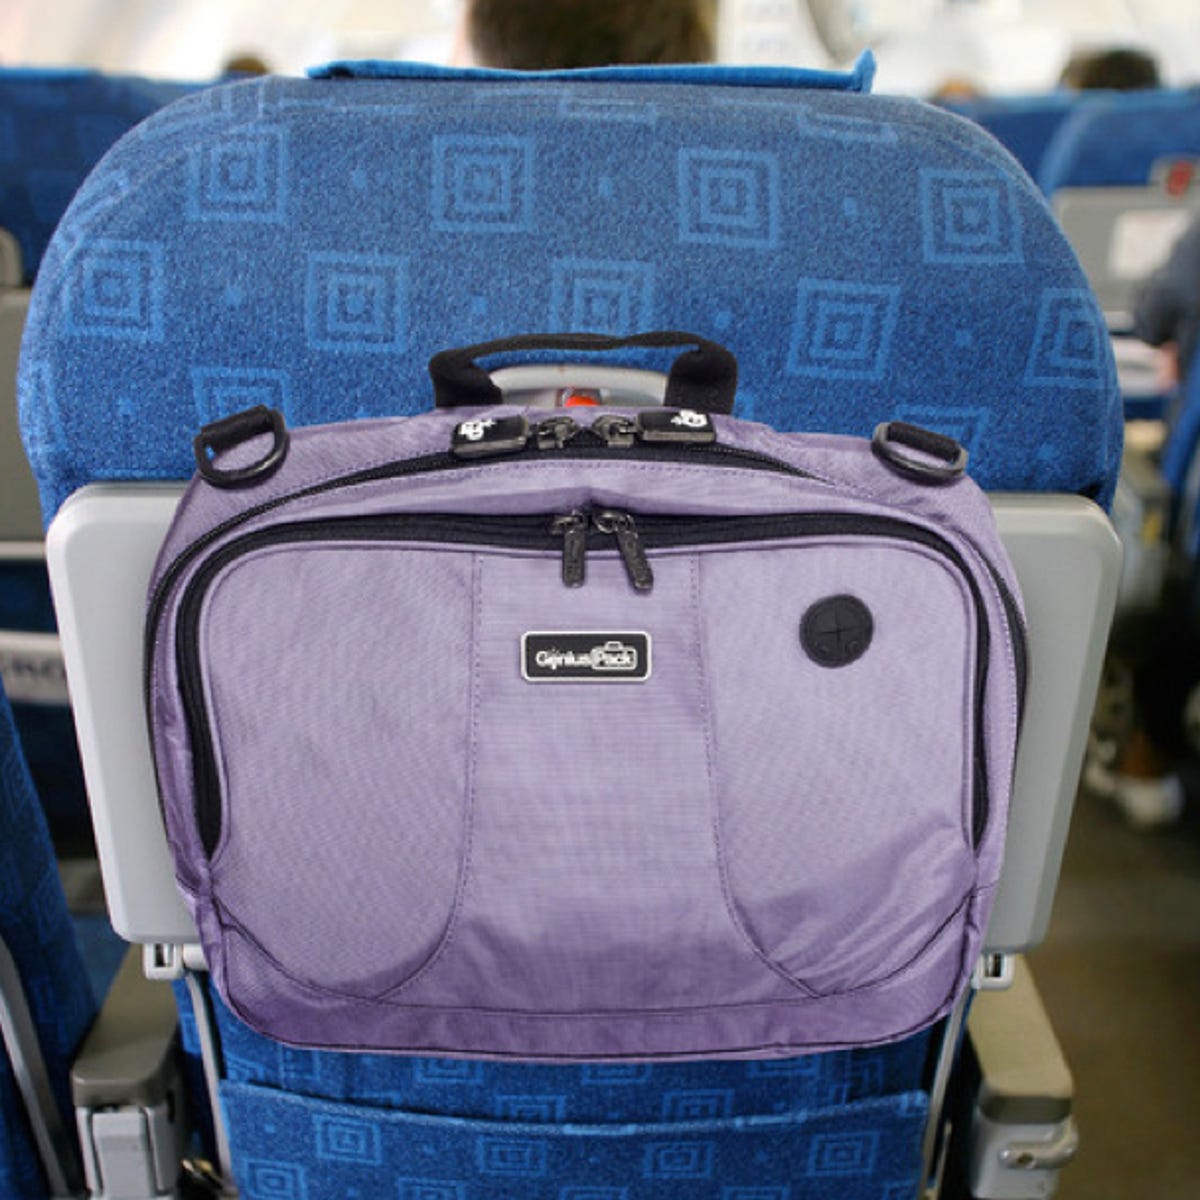 Travel gear to make coach feel more like first class (pictures) - CNET